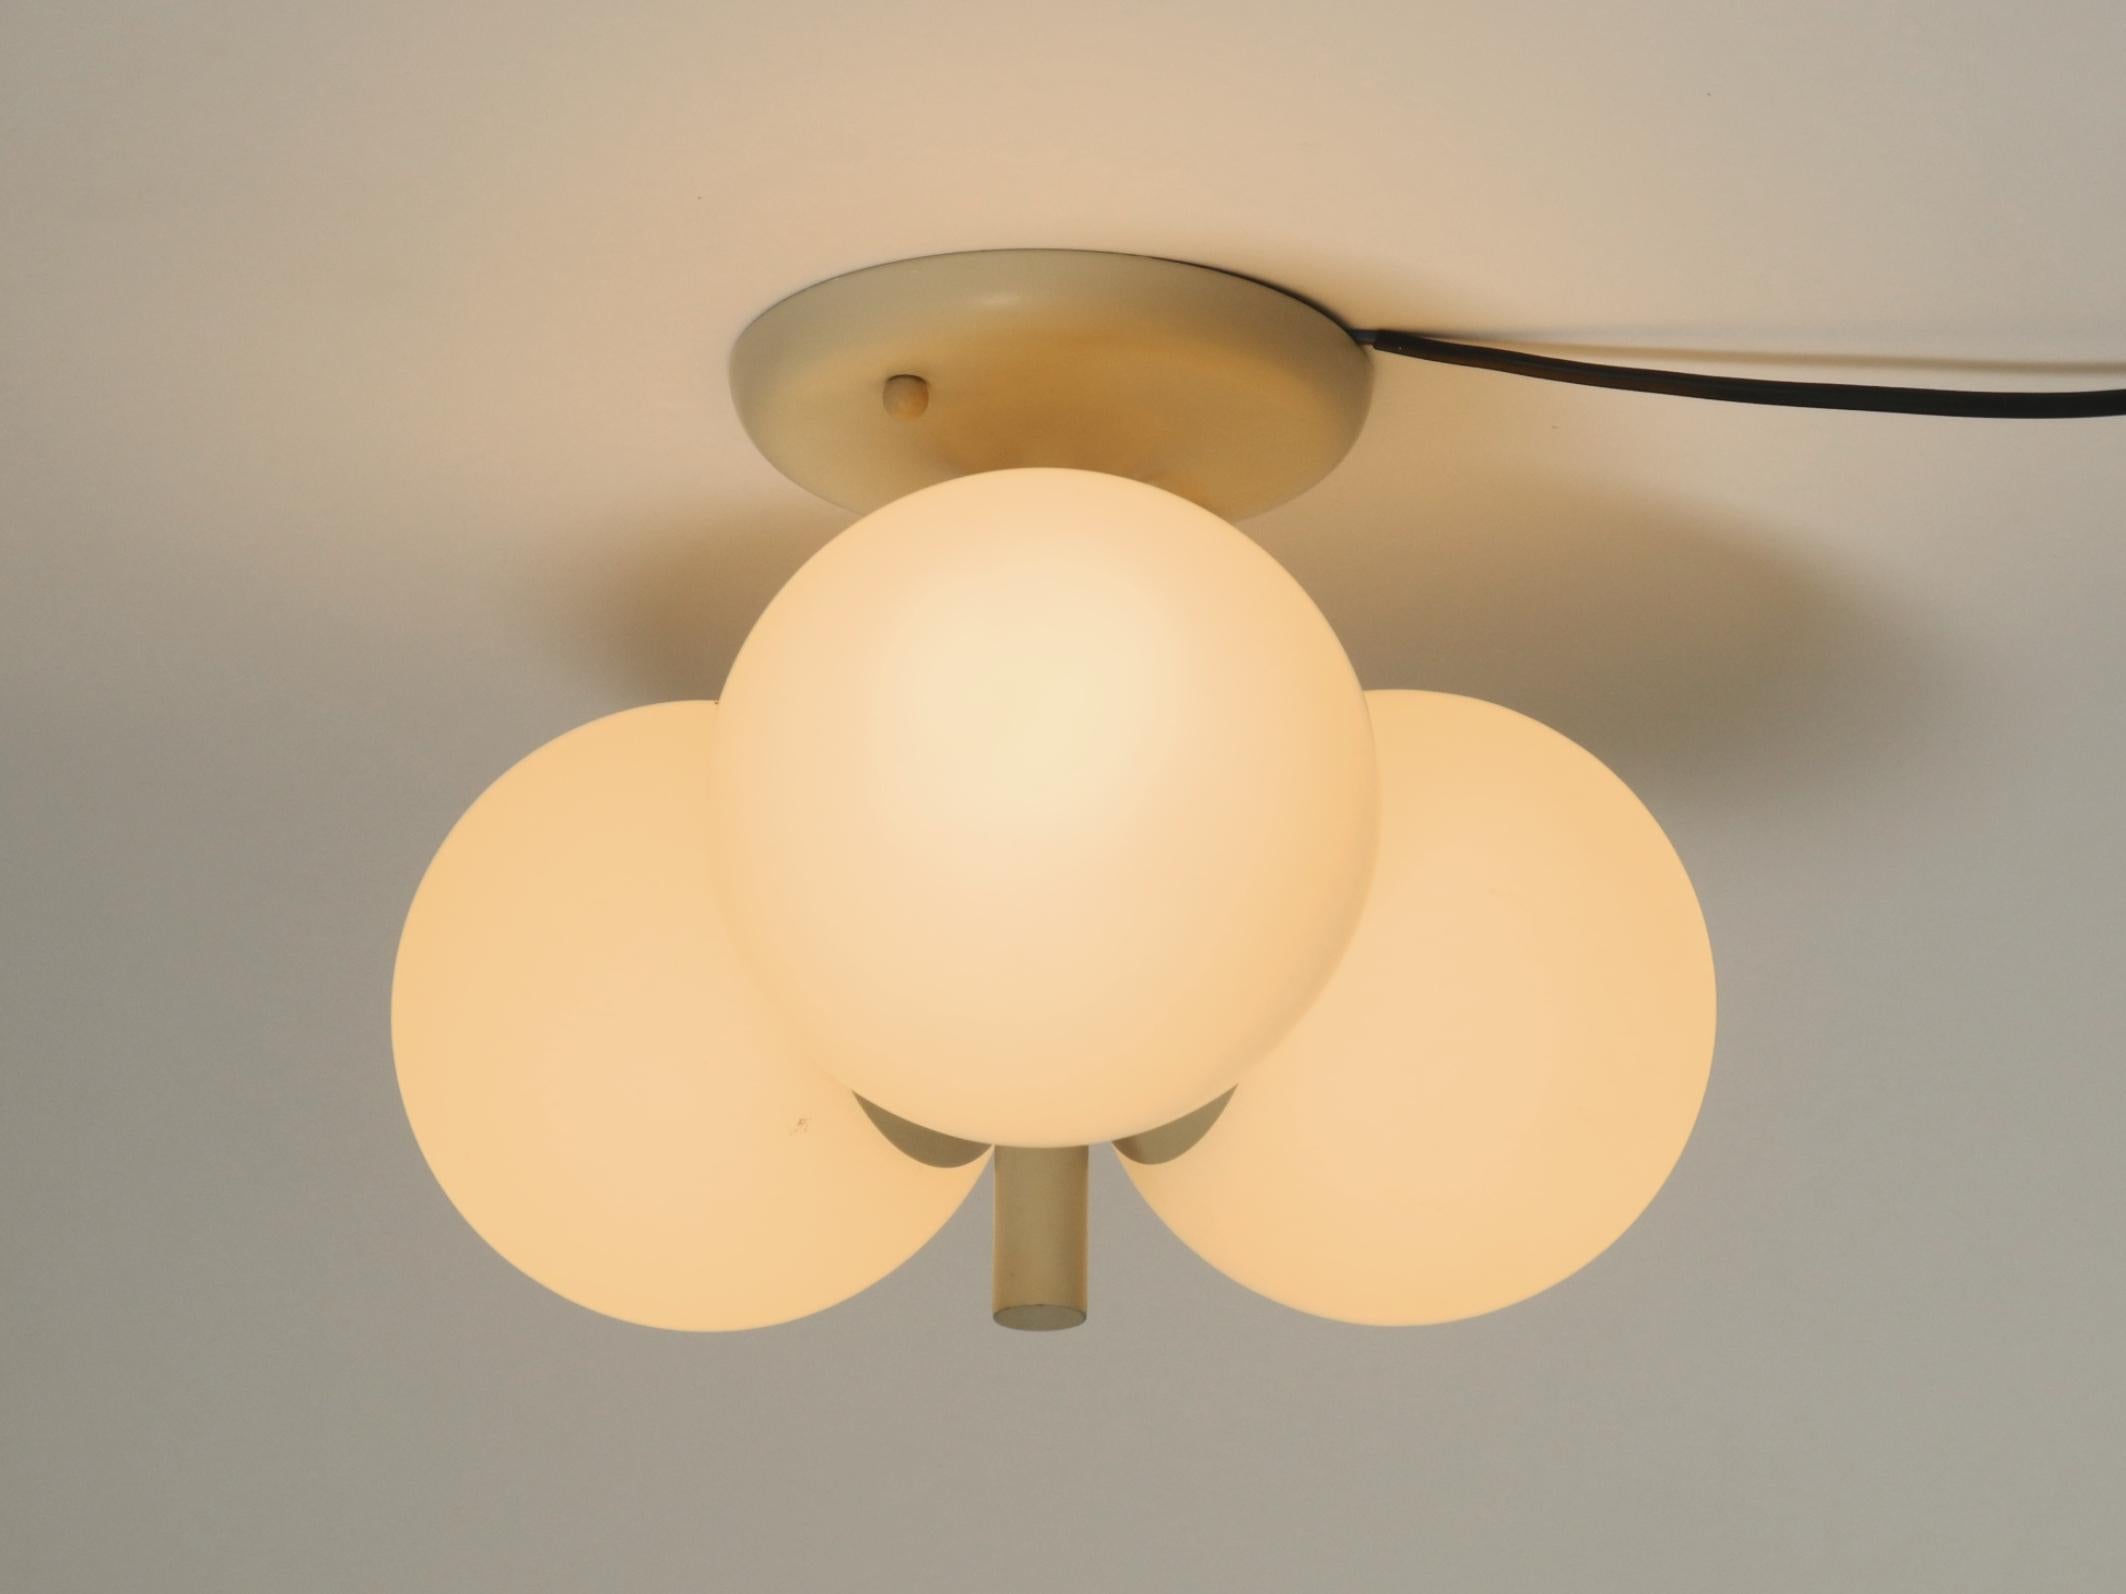 Light gray 1960s Space Age Kaiser Leuchten metal ceiling lamps with 3 glass ball In Good Condition For Sale In München, DE